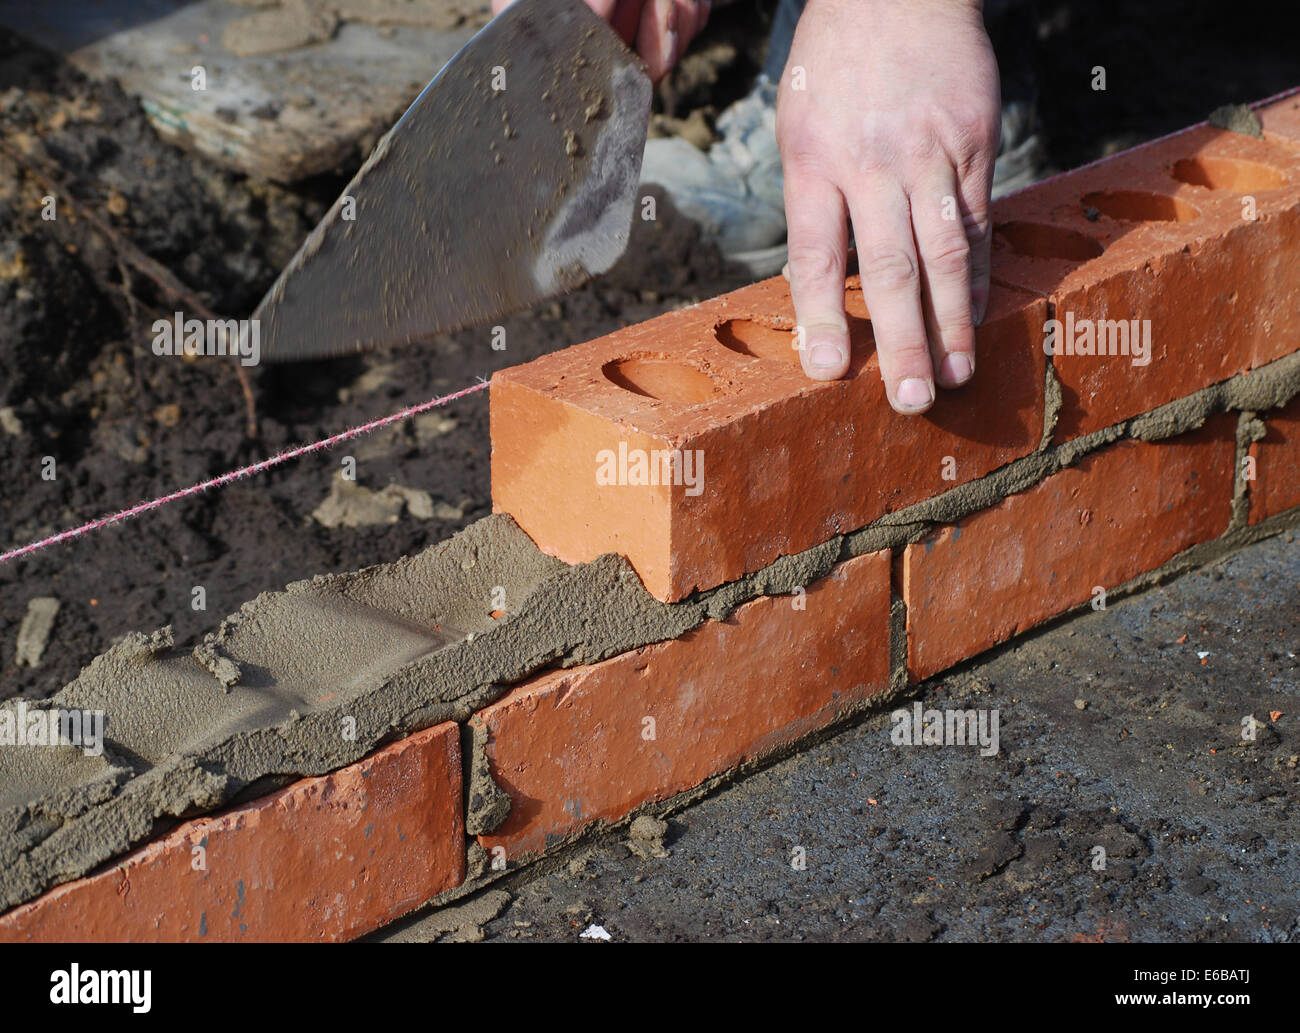 Construction worker laying bricks showing trowel and guideline. Stock Photo